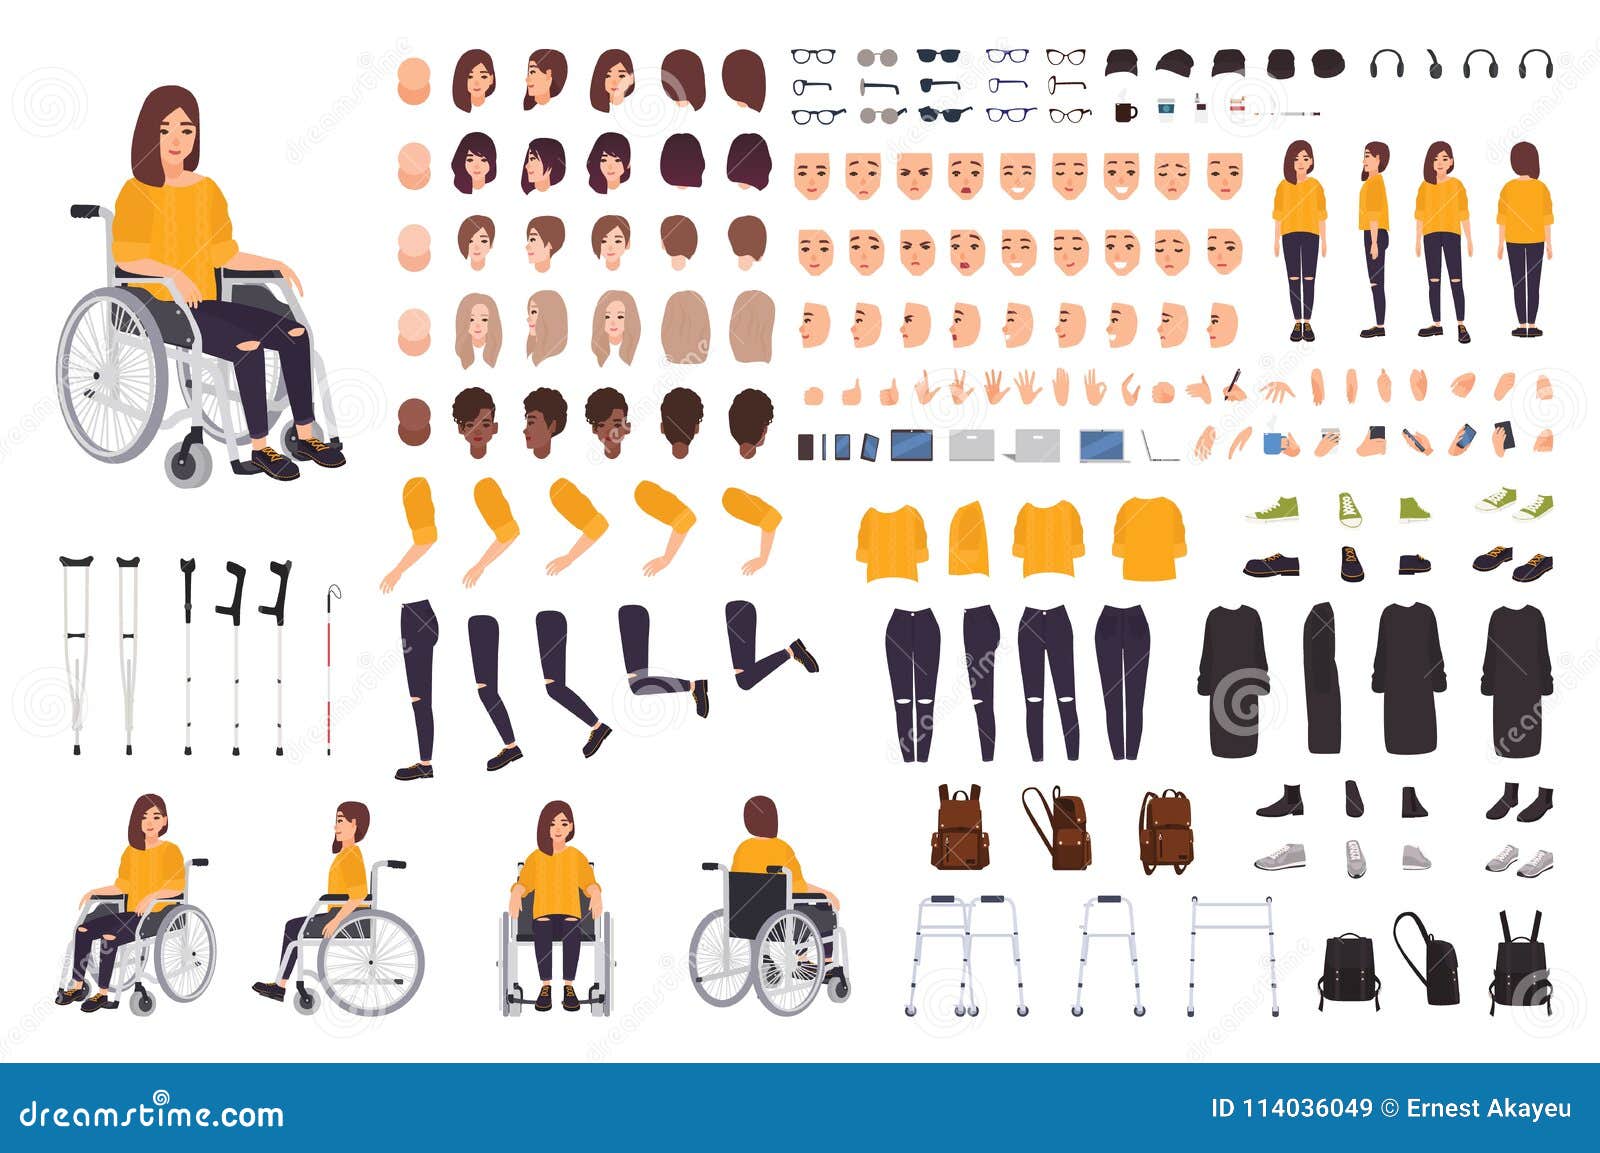 young disabled woman in wheelchair constructor or diy kit. set of body parts, facial expressions, crutches, walking